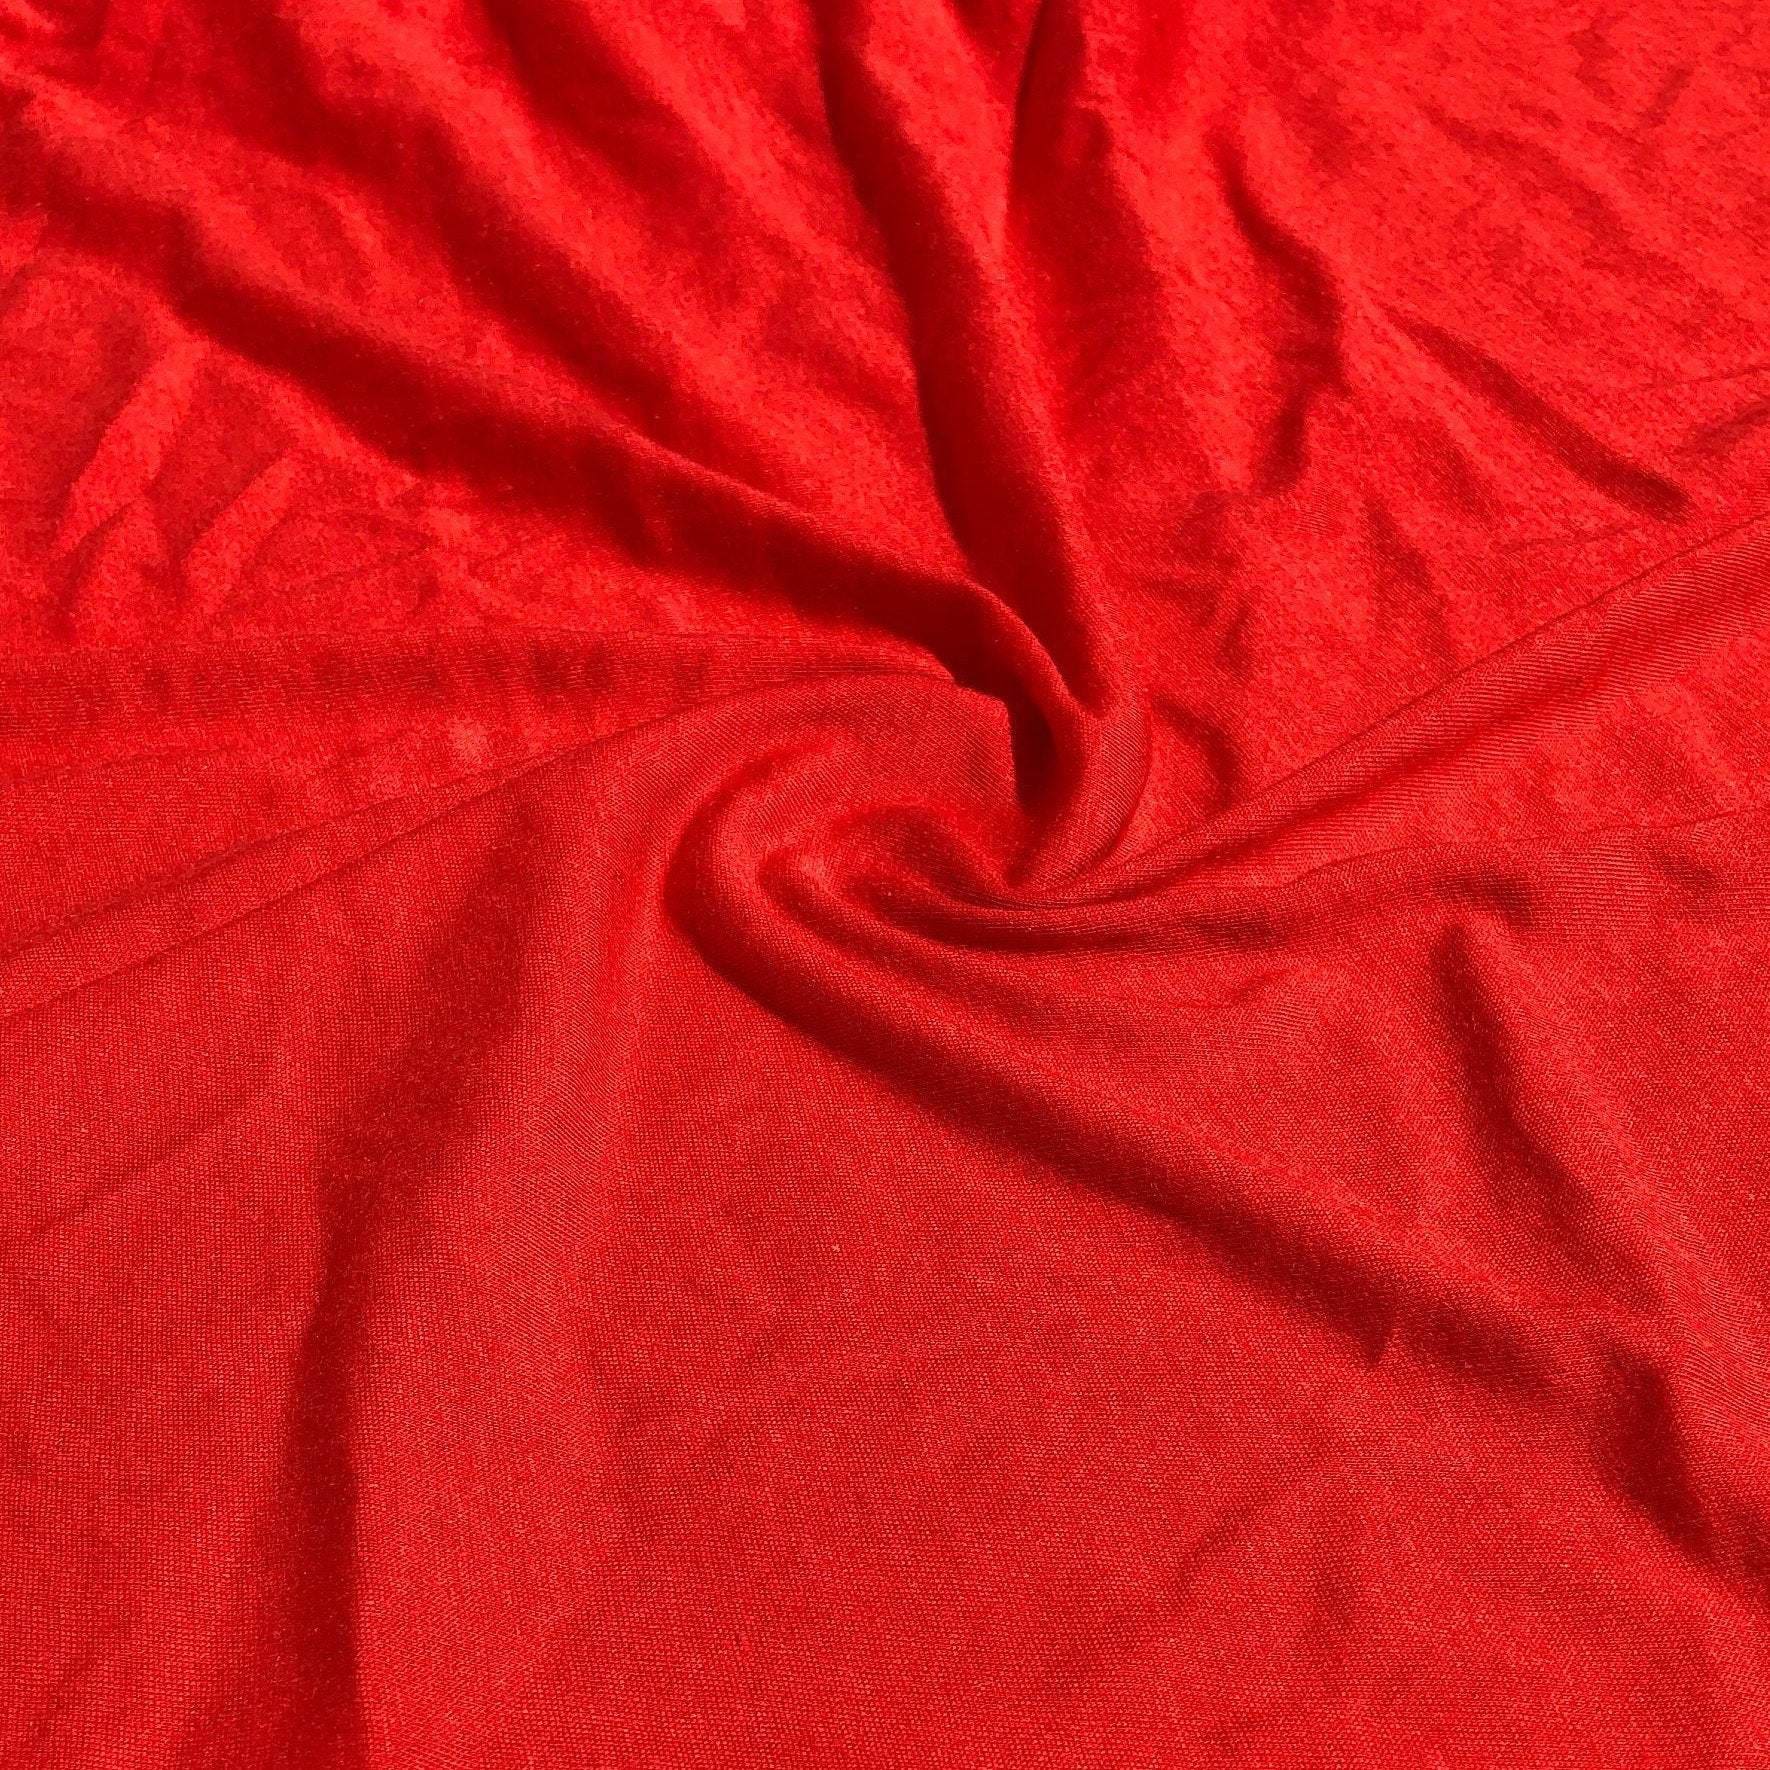 58 Solid Red 100% Viscose Rayon Piece Dyed Jersey Knit Fabric